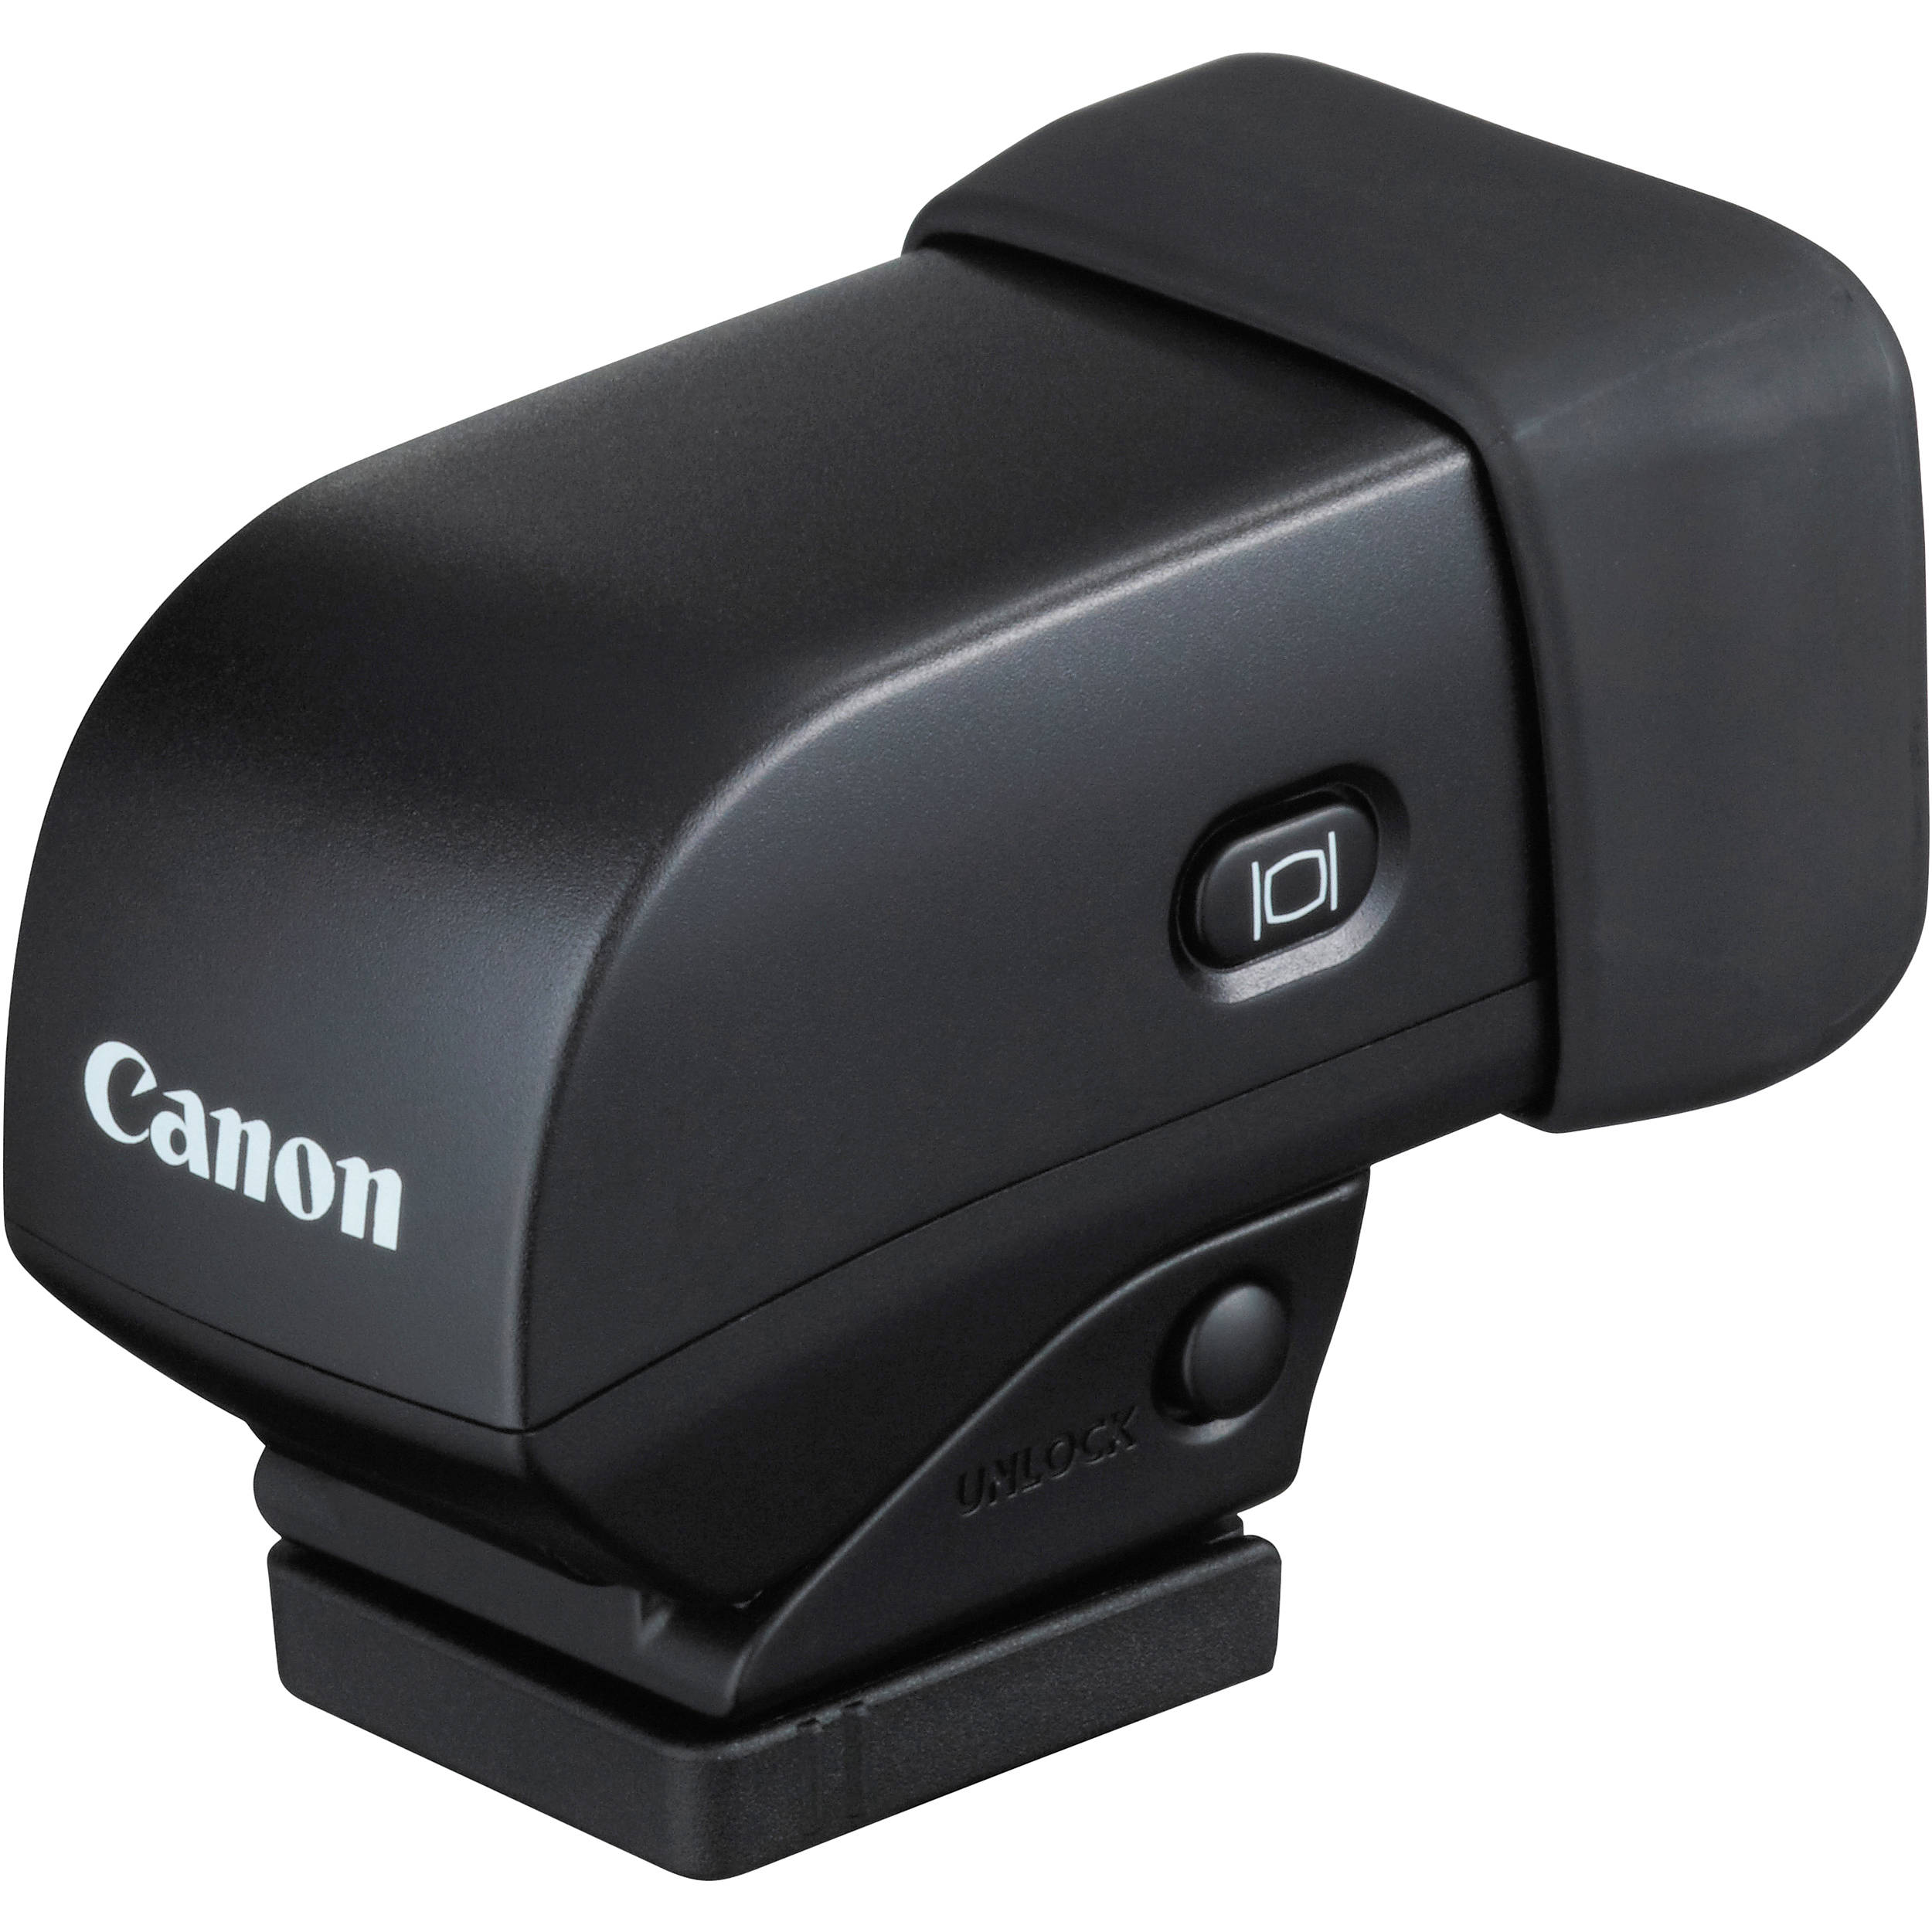 Canon Evf Dc1 Electronic Viewfinder For Powershot G1 X 9555b001